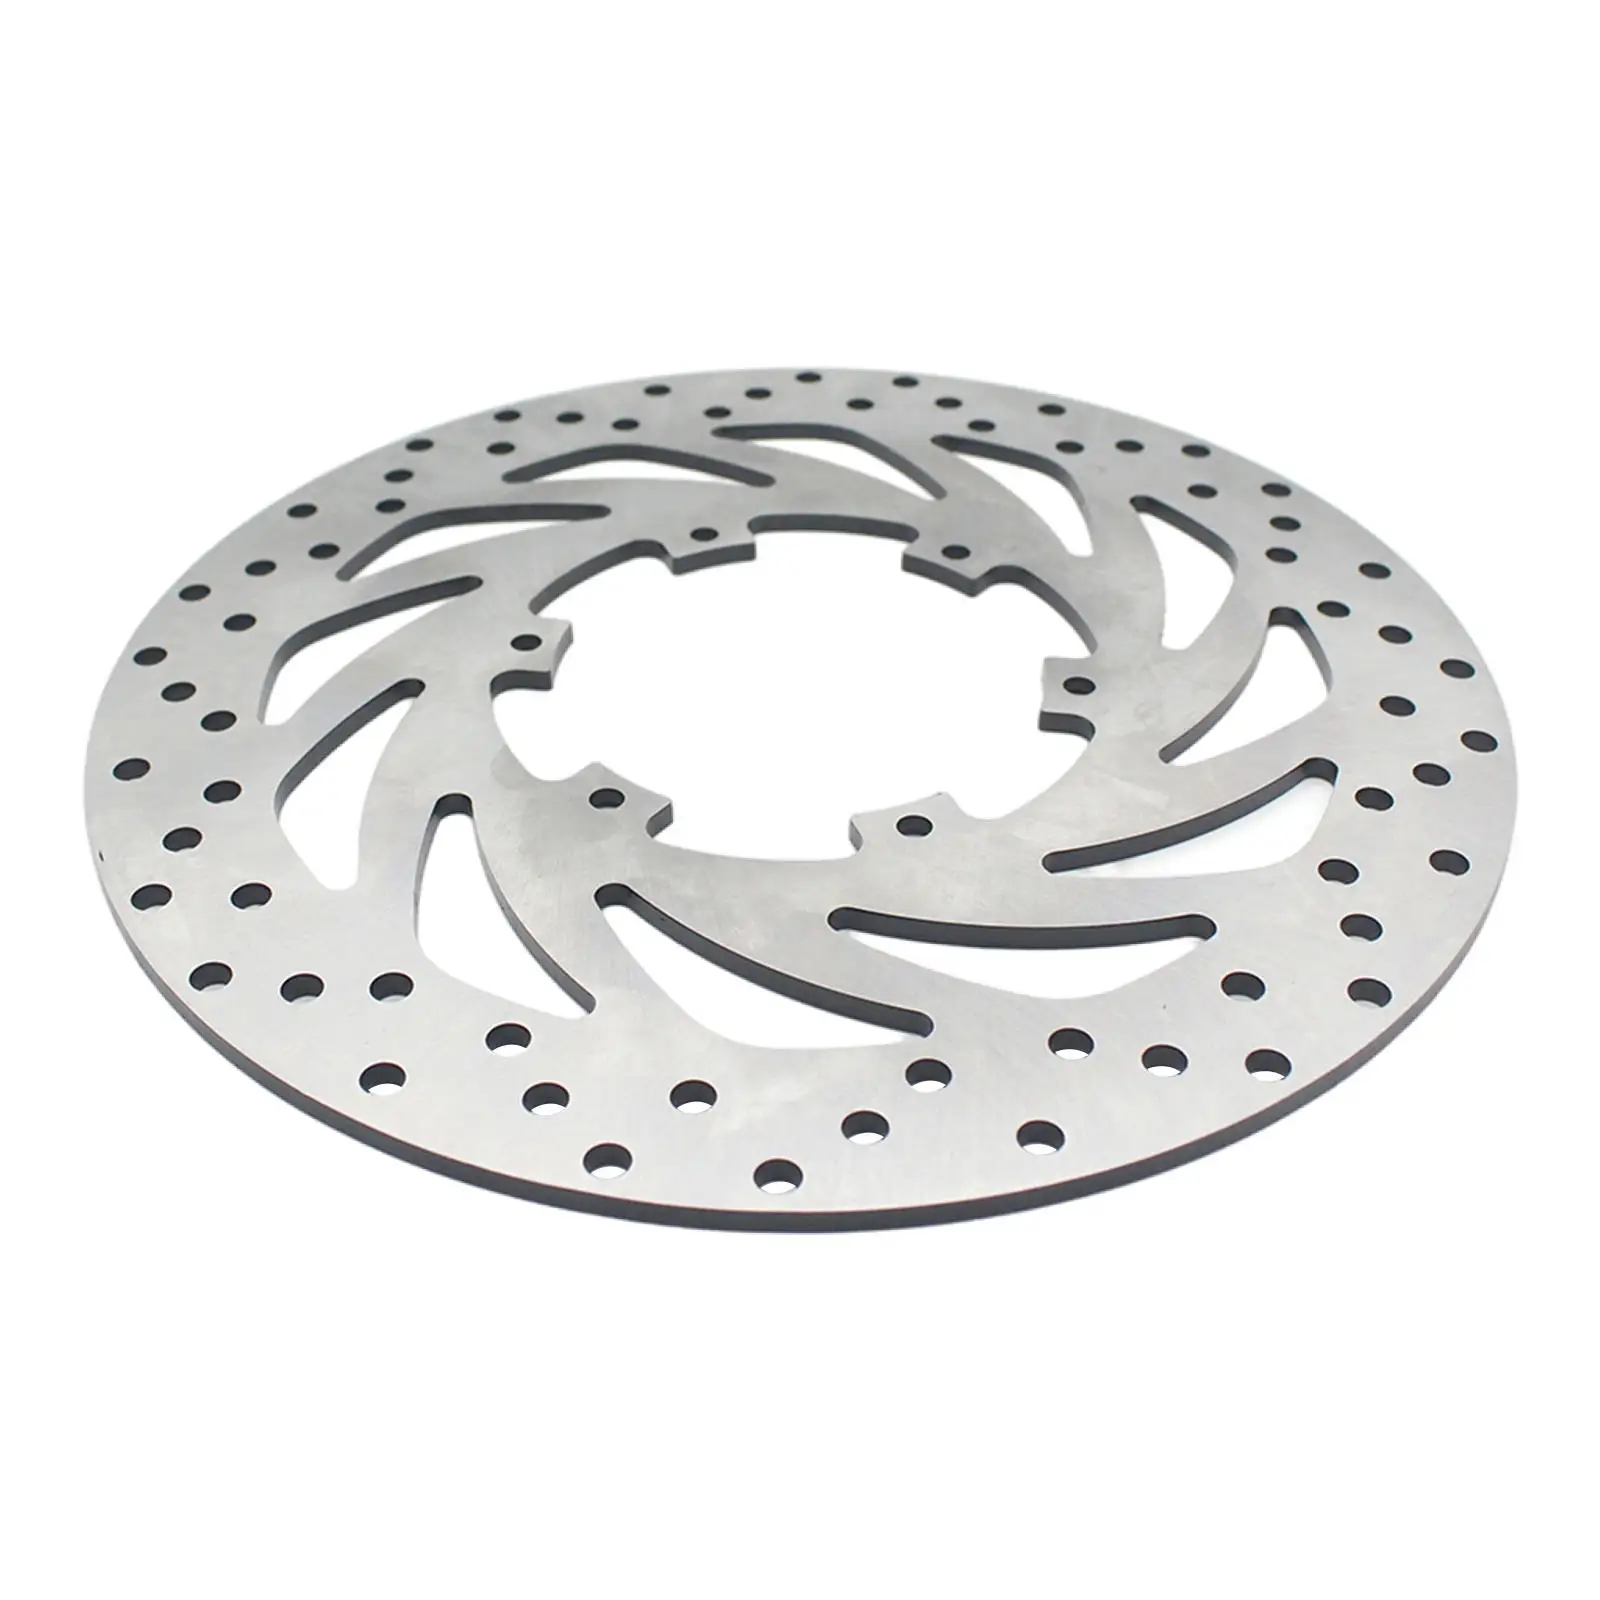 Motorcycle Brake Disc Rotor with Drilled Holes Pad for BMW F 650 GS ST CS 1993-2009 Brake System Smooth and Quiet Braking